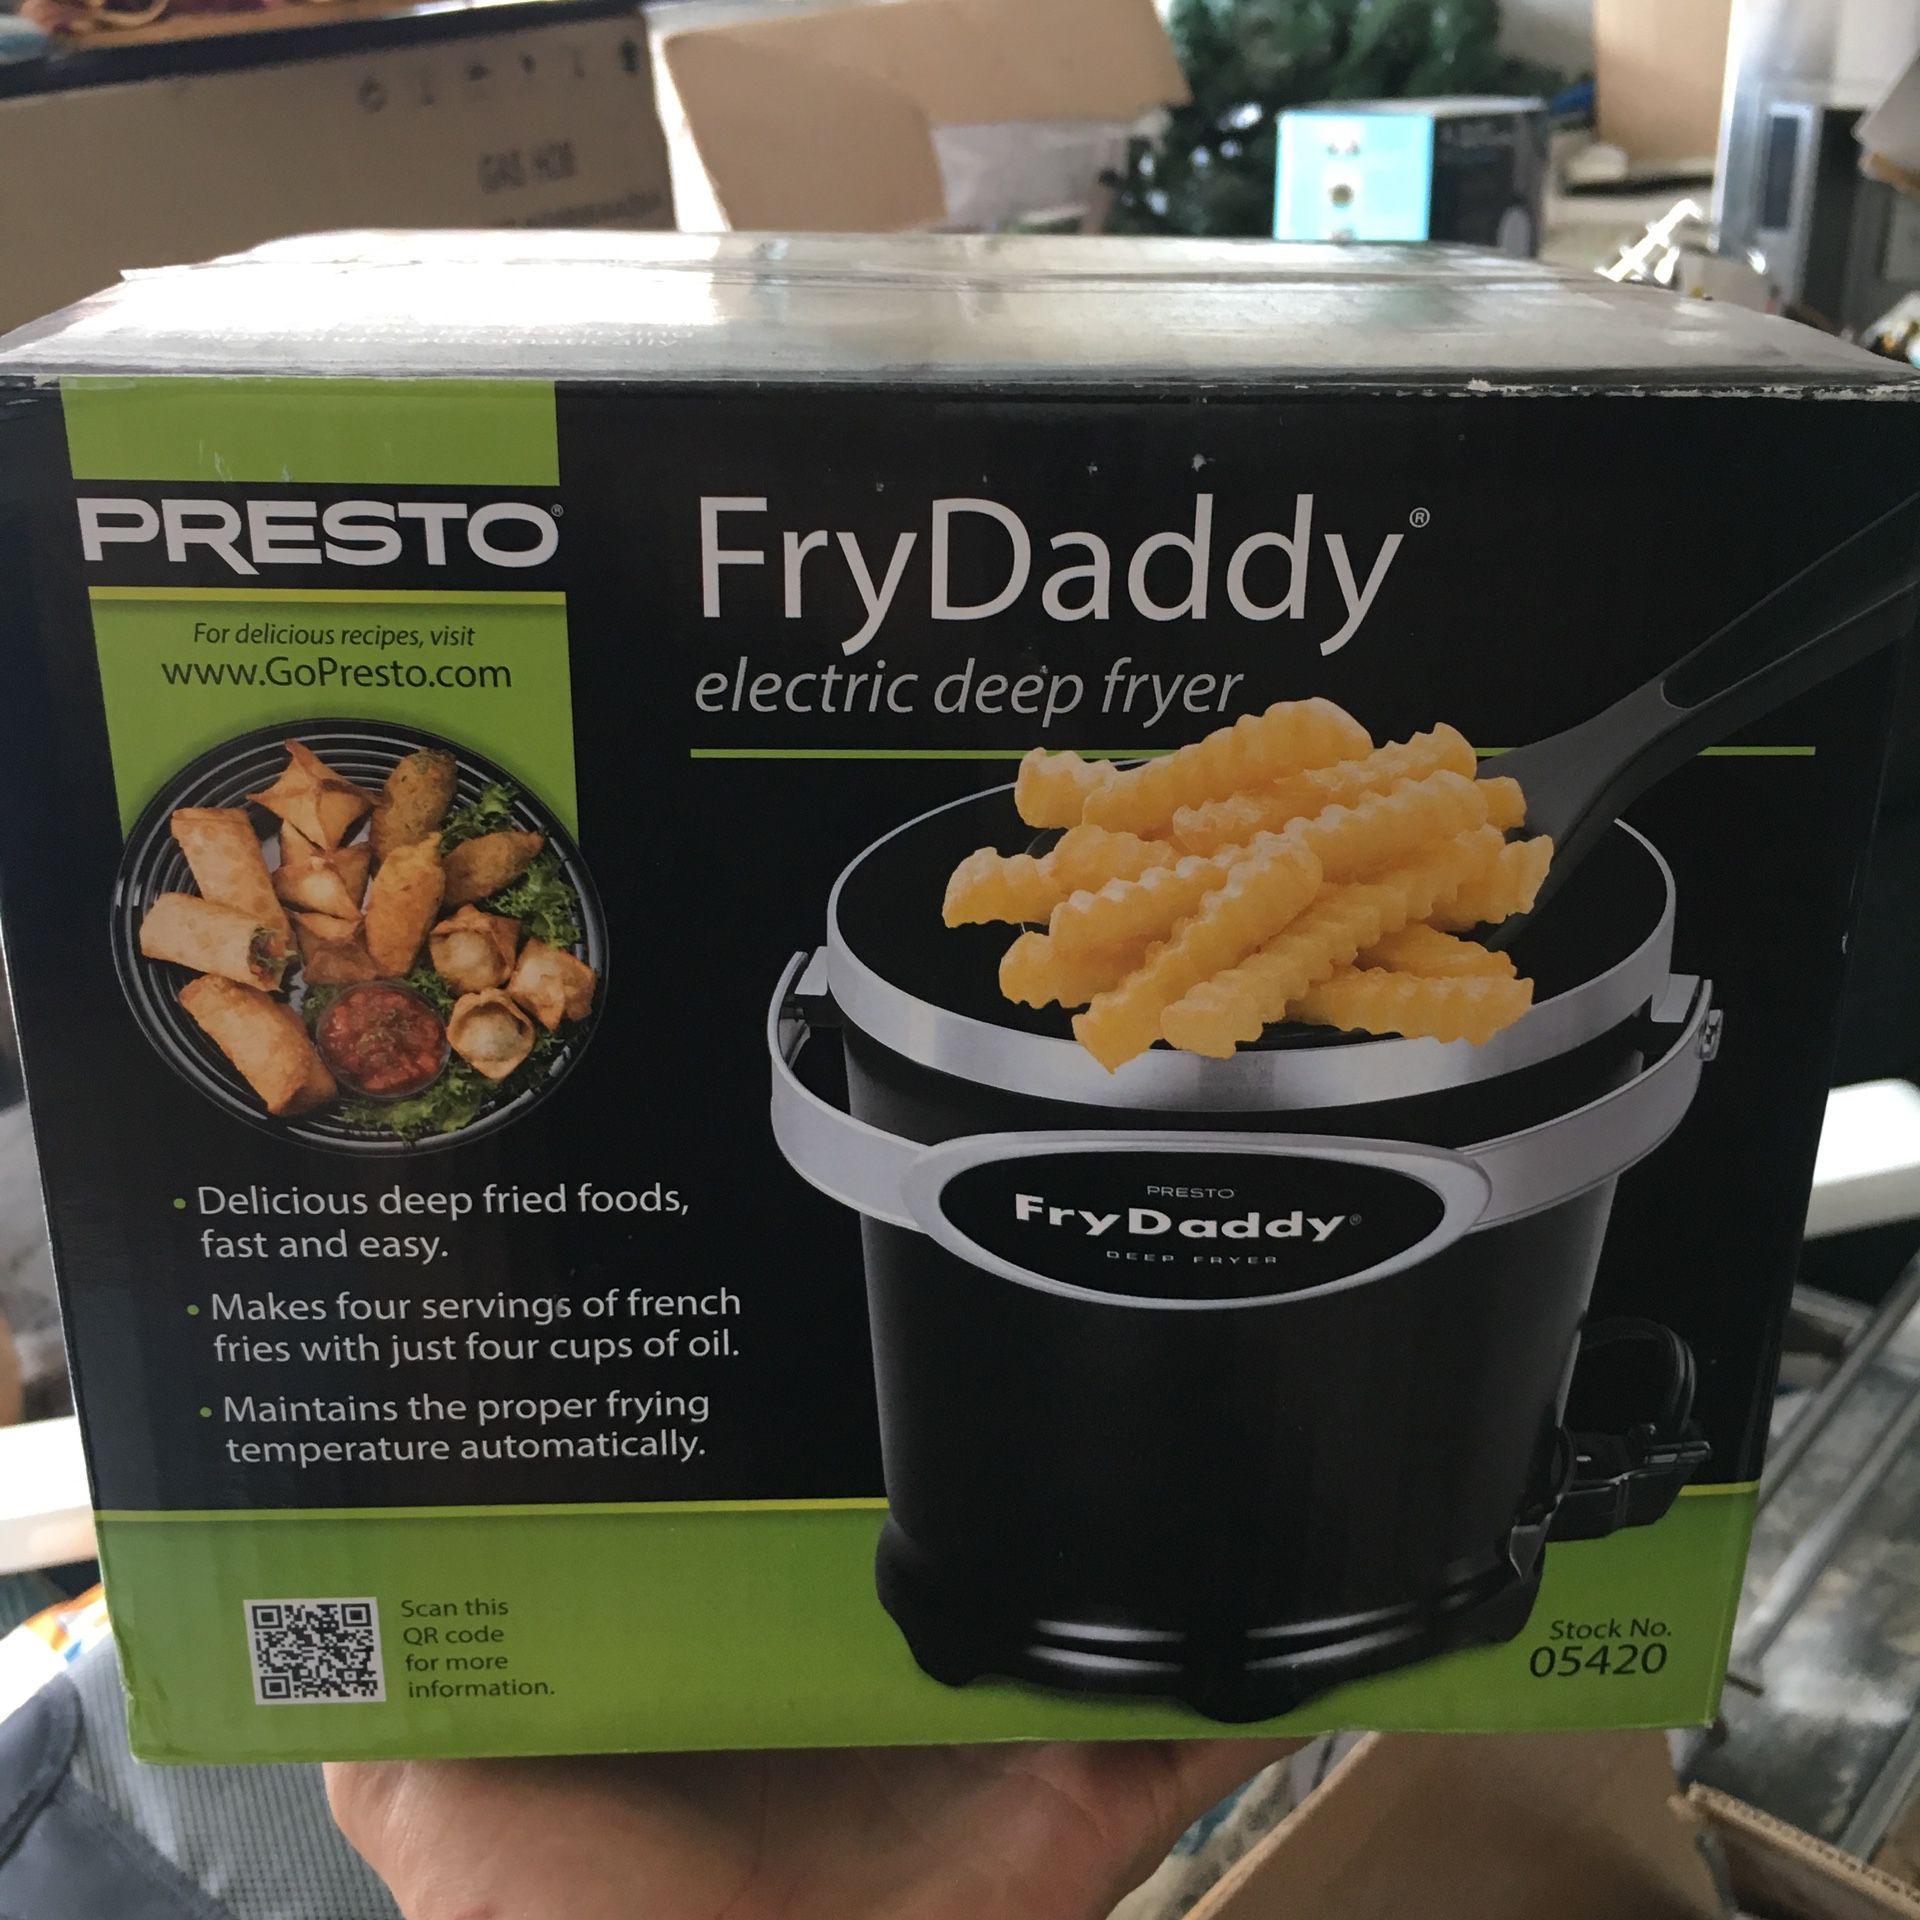 Fry Daddy Vintage Presto Deep Fryer With Lid for Sale in Goshen, NY -  OfferUp